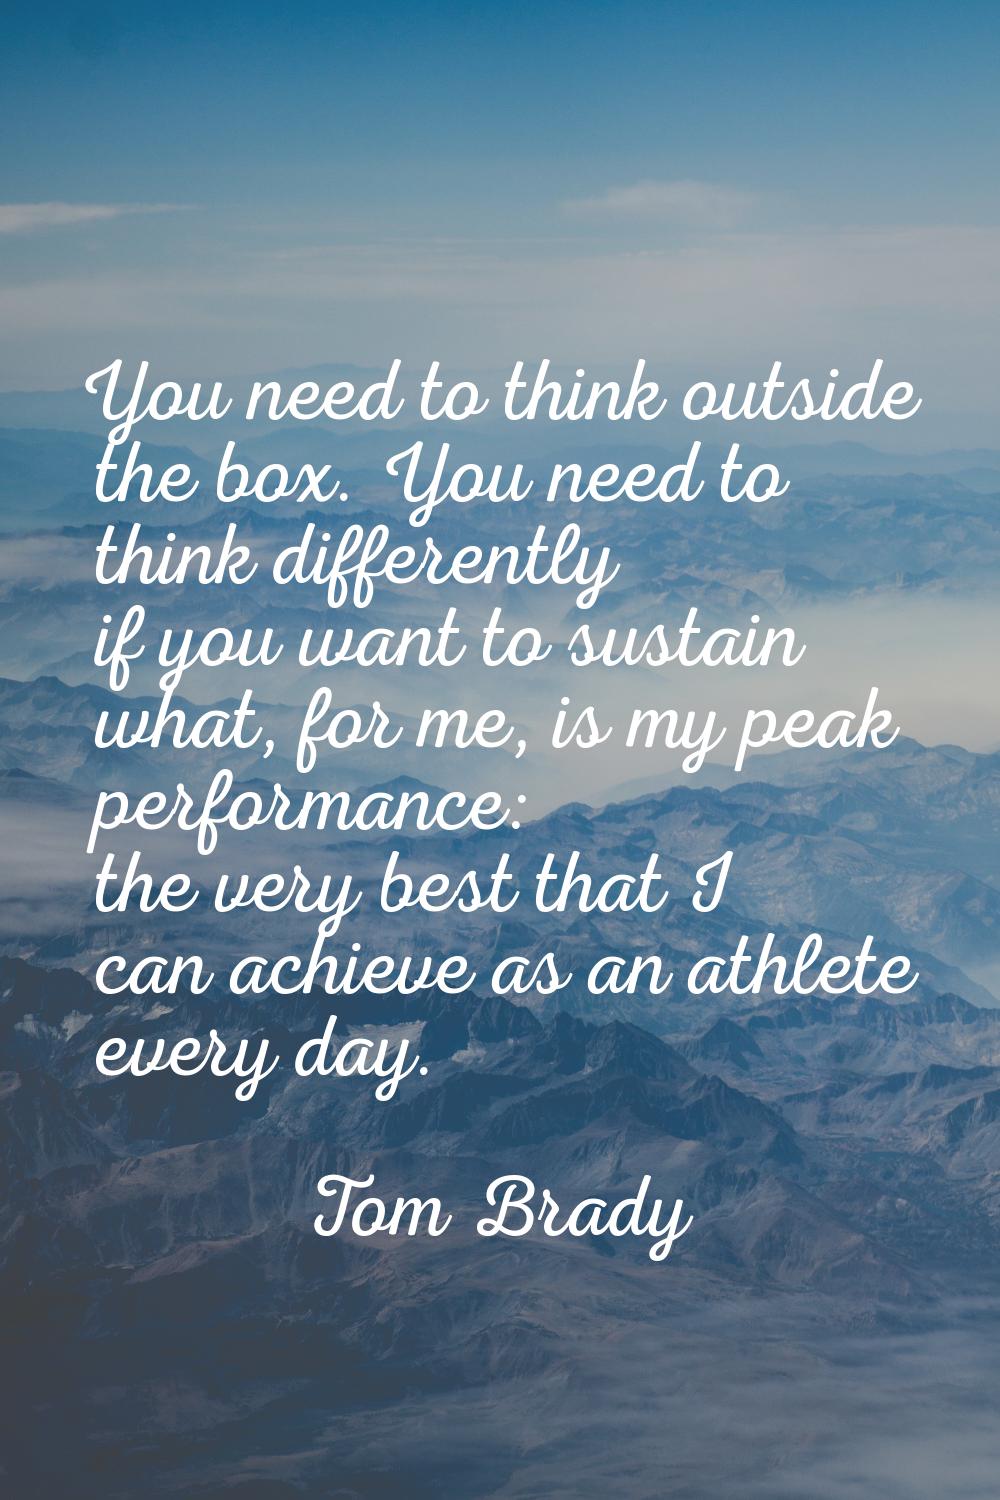 You need to think outside the box. You need to think differently if you want to sustain what, for m